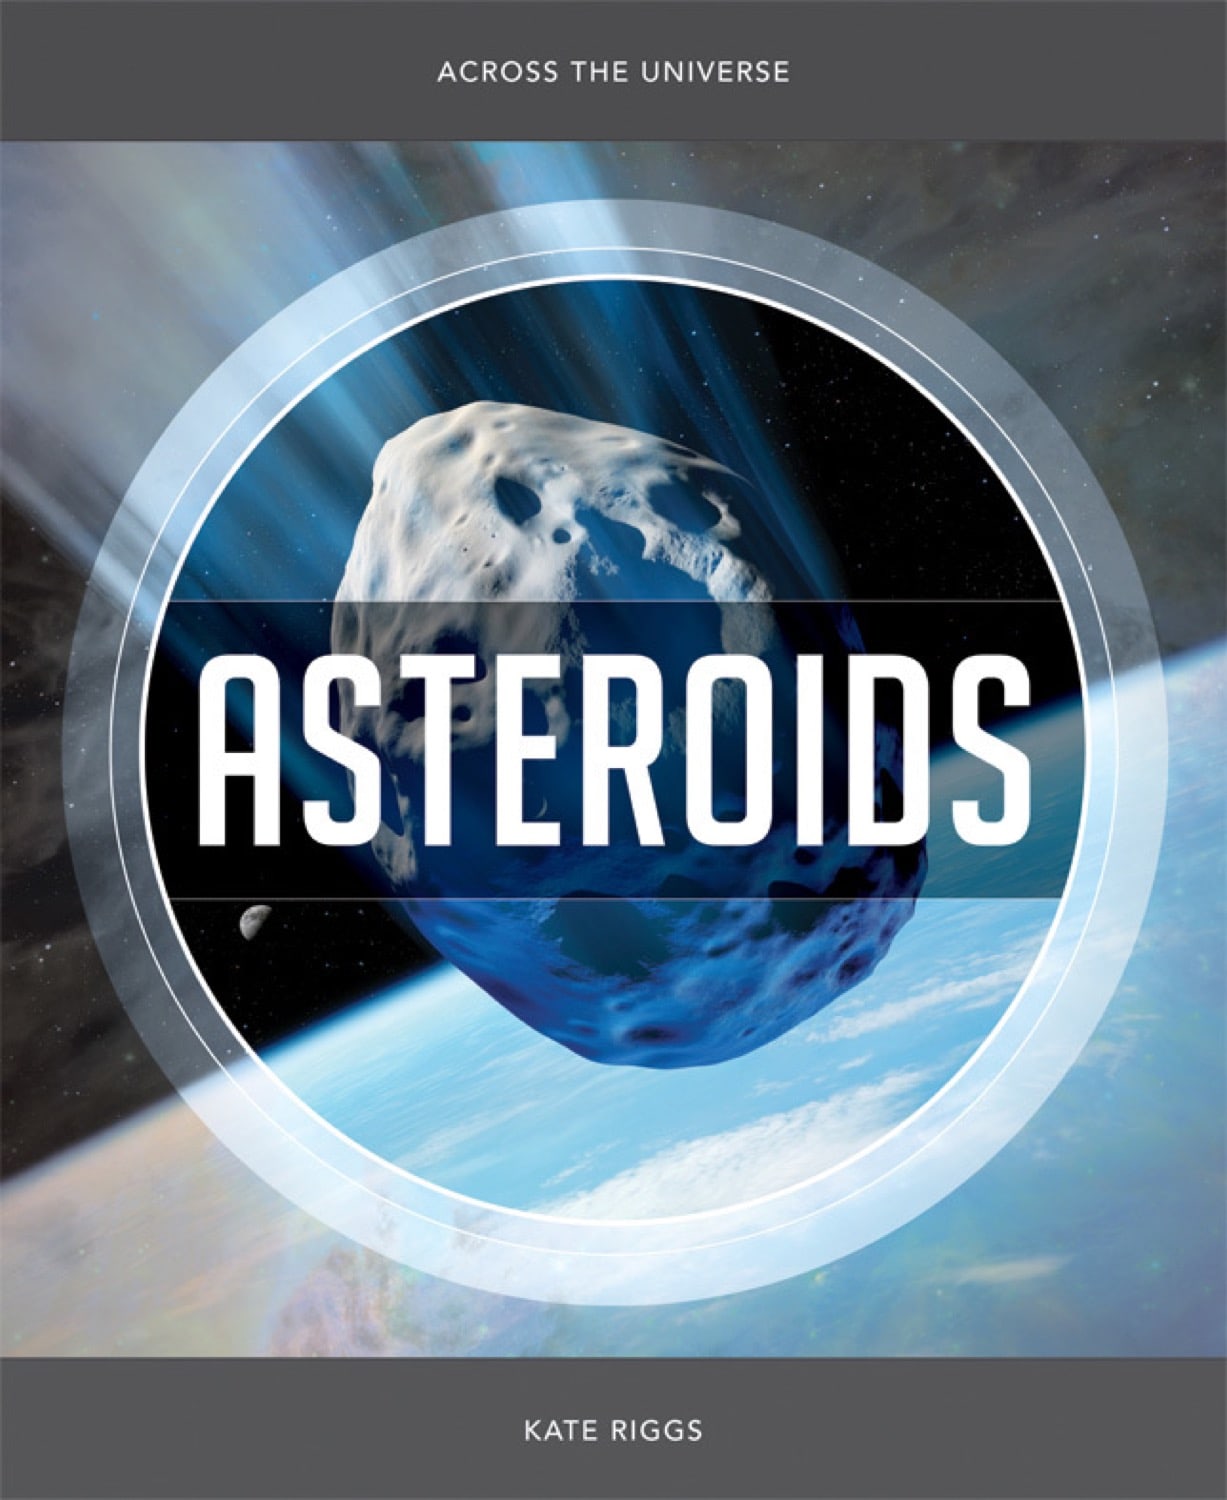 Across the Universe: Asteroids